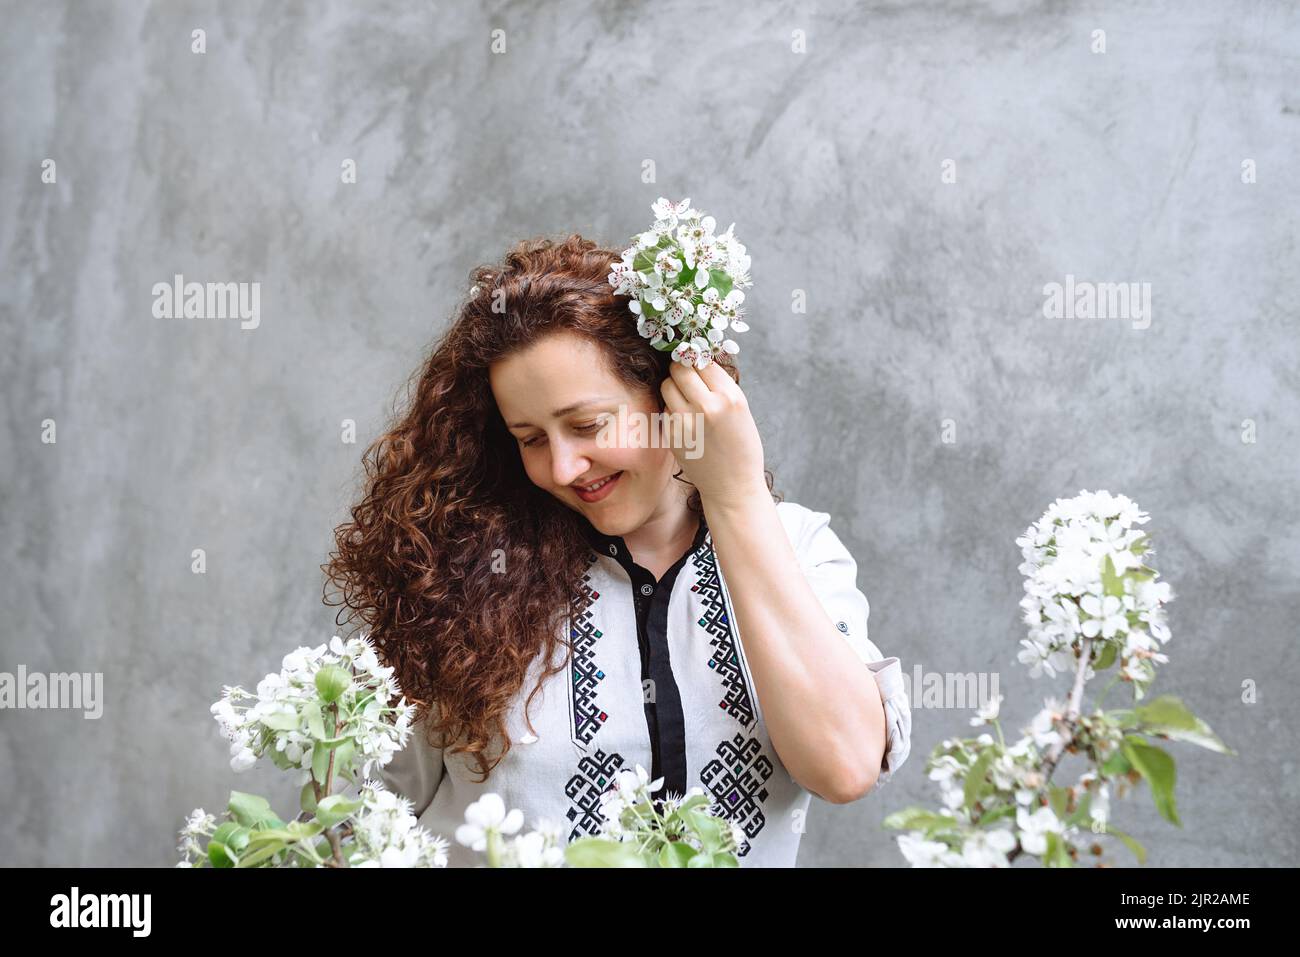 Girl with curly hair in a shirt with a downcast look. Woman holds blossoming branch of apple tree in hand against background of concrete wall. Spring flowering time. Constitution Day of Ukraine Stock Photo